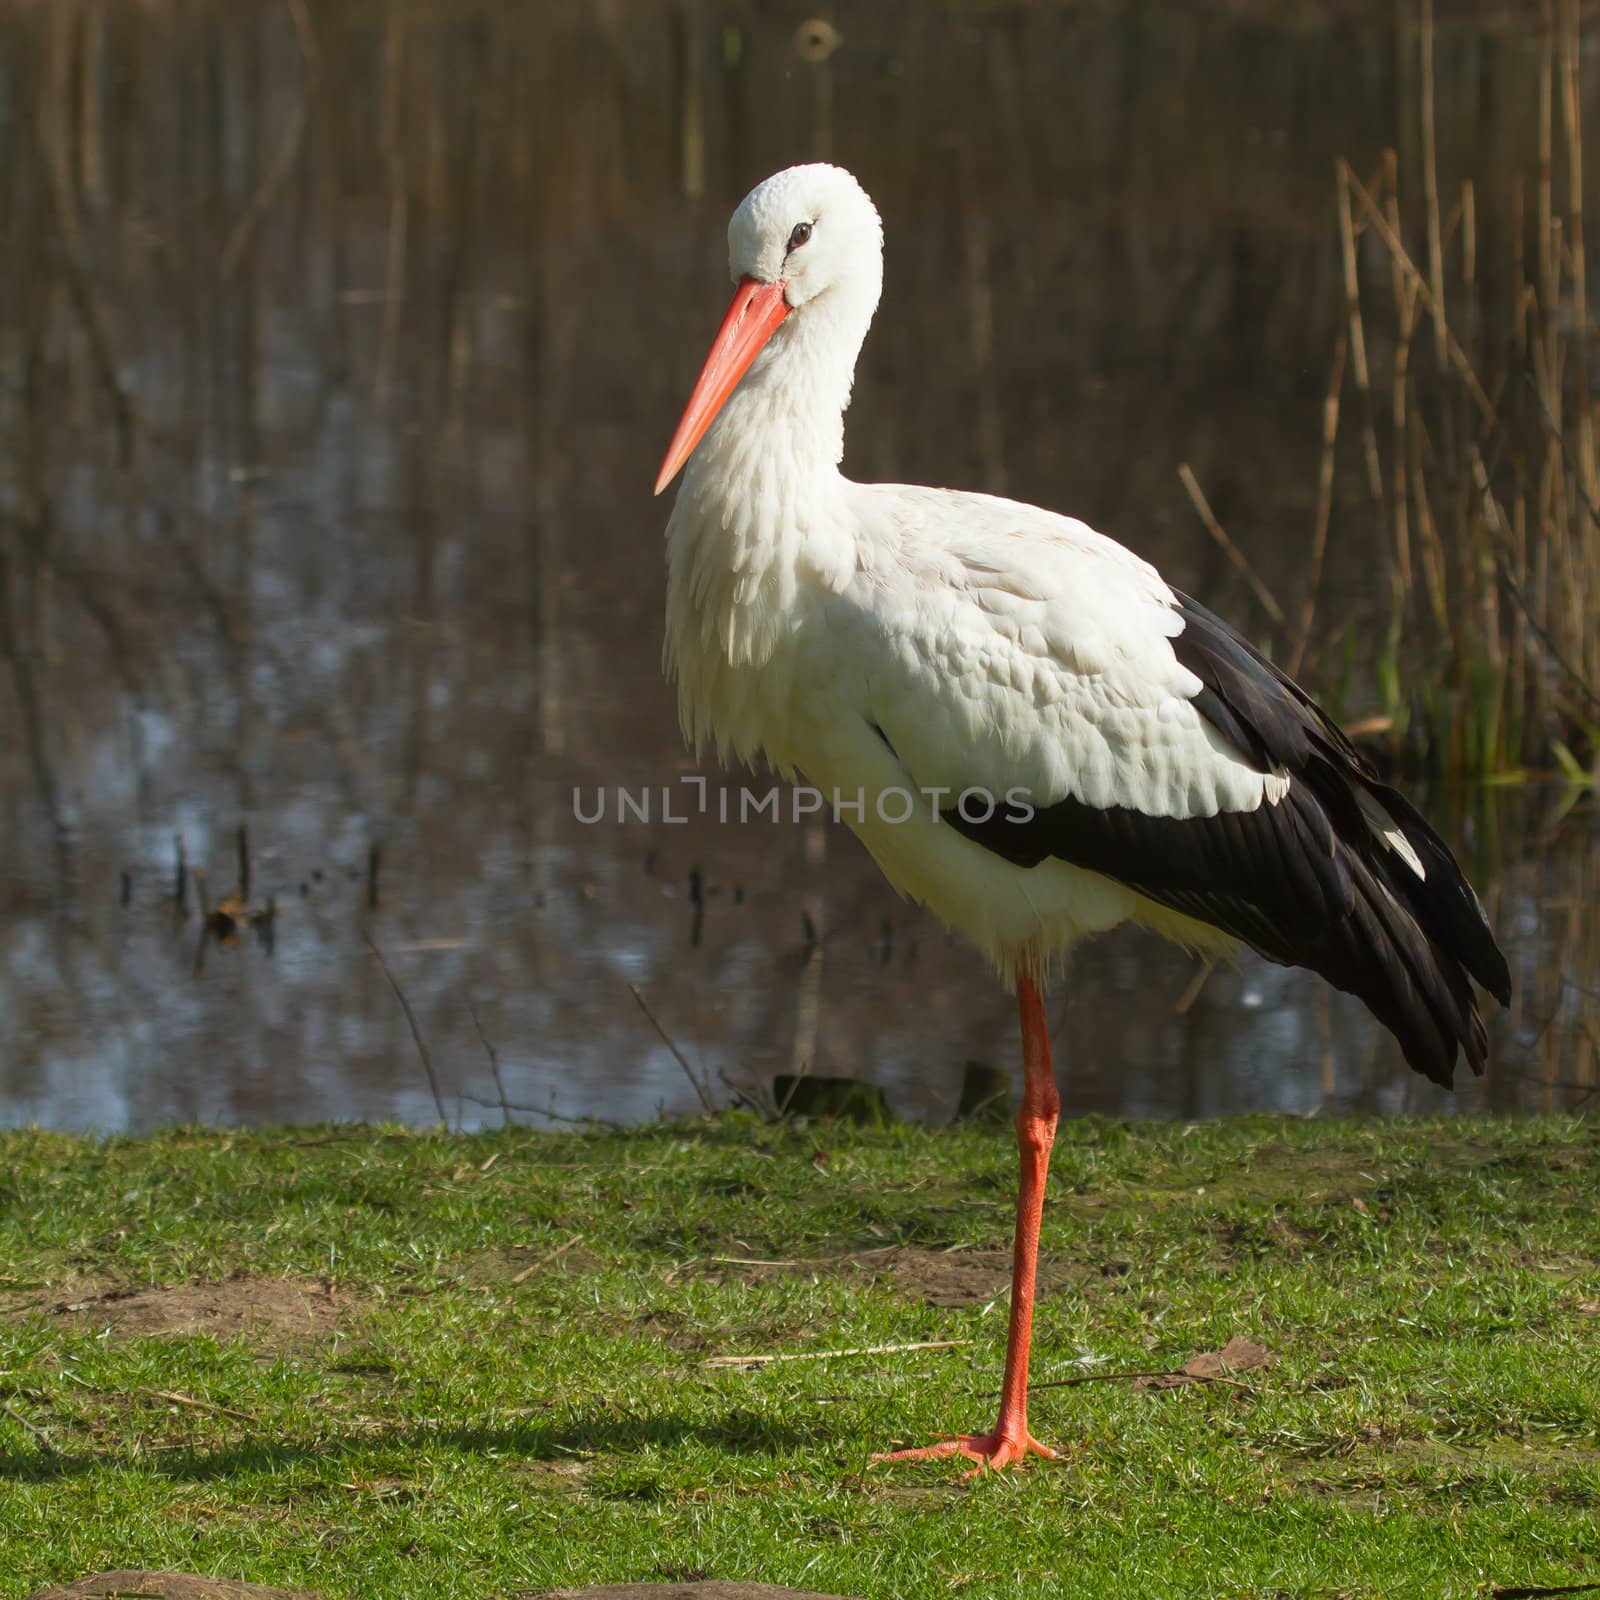 A stork in its natural habitat by michaklootwijk